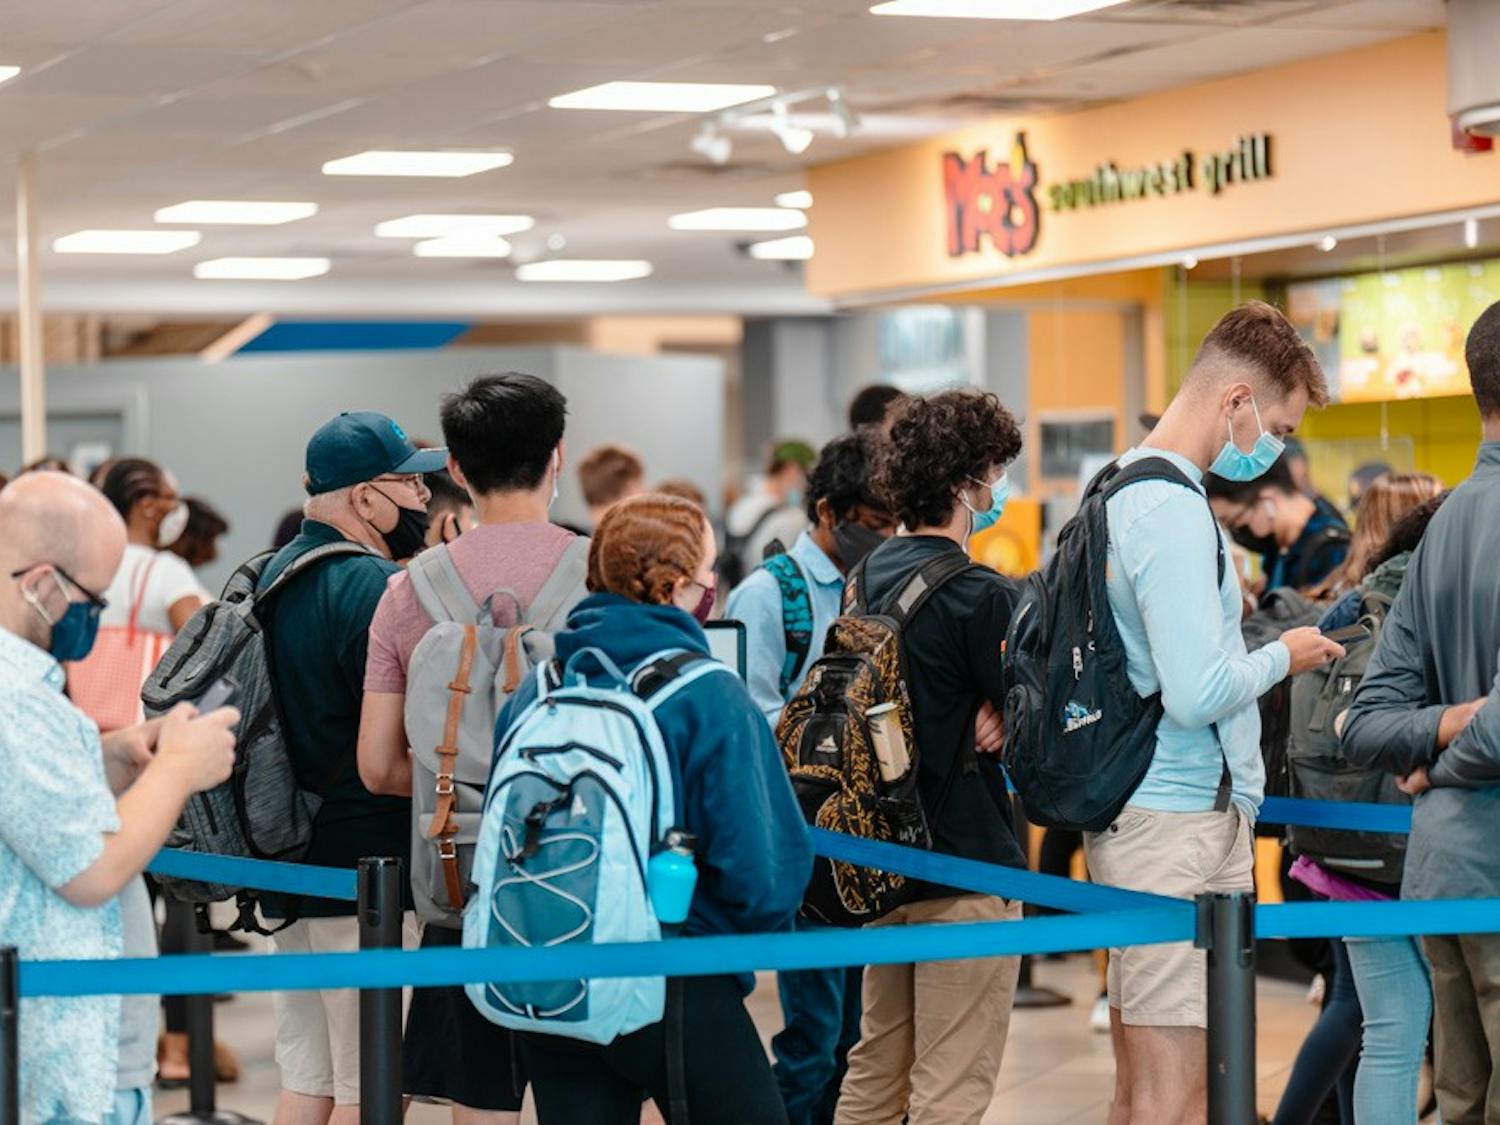 Long lines in the Student Union have left some students frustrated and hungry.&nbsp;